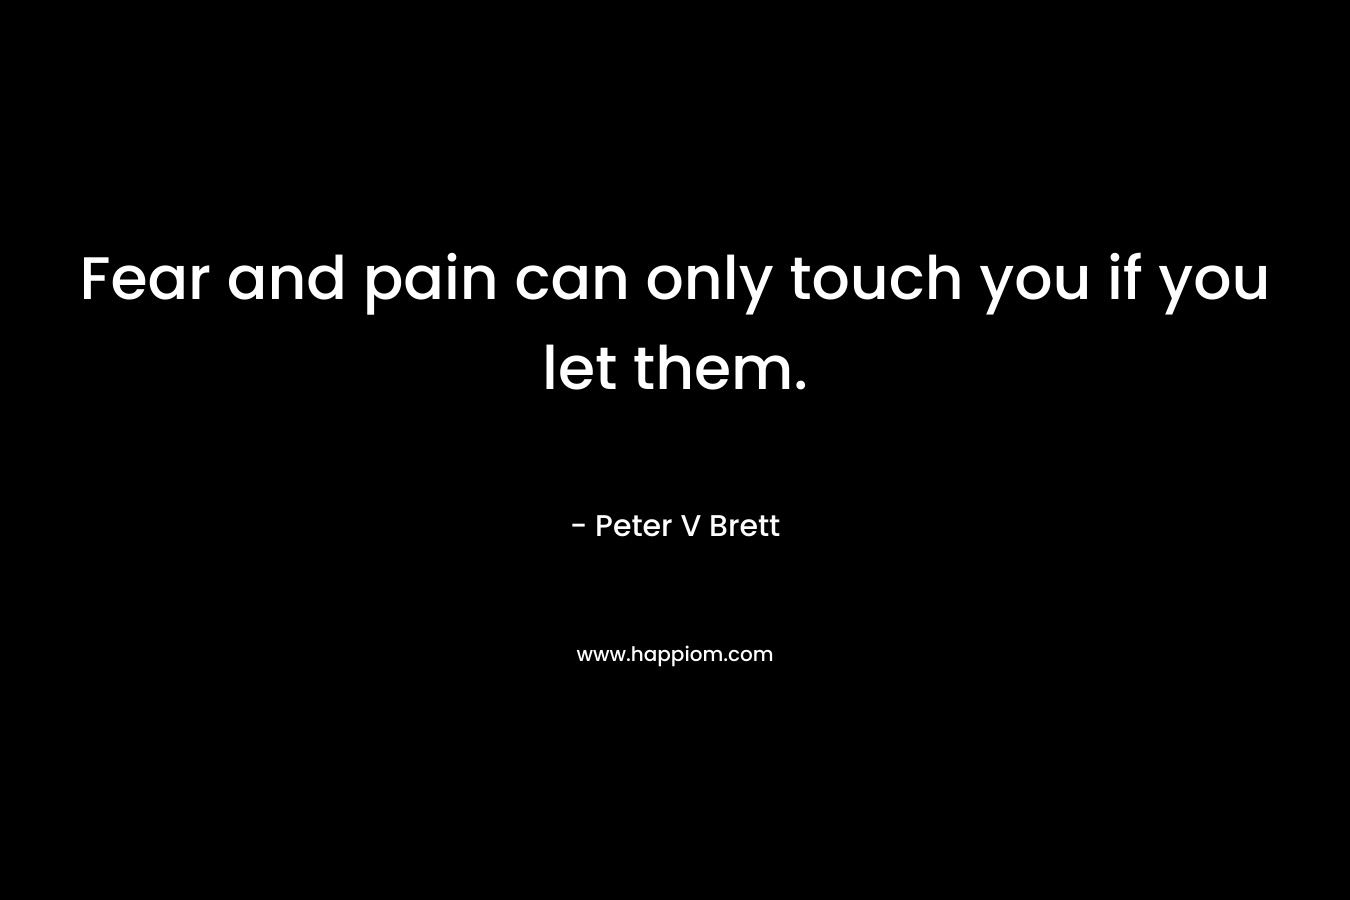 Fear and pain can only touch you if you let them.